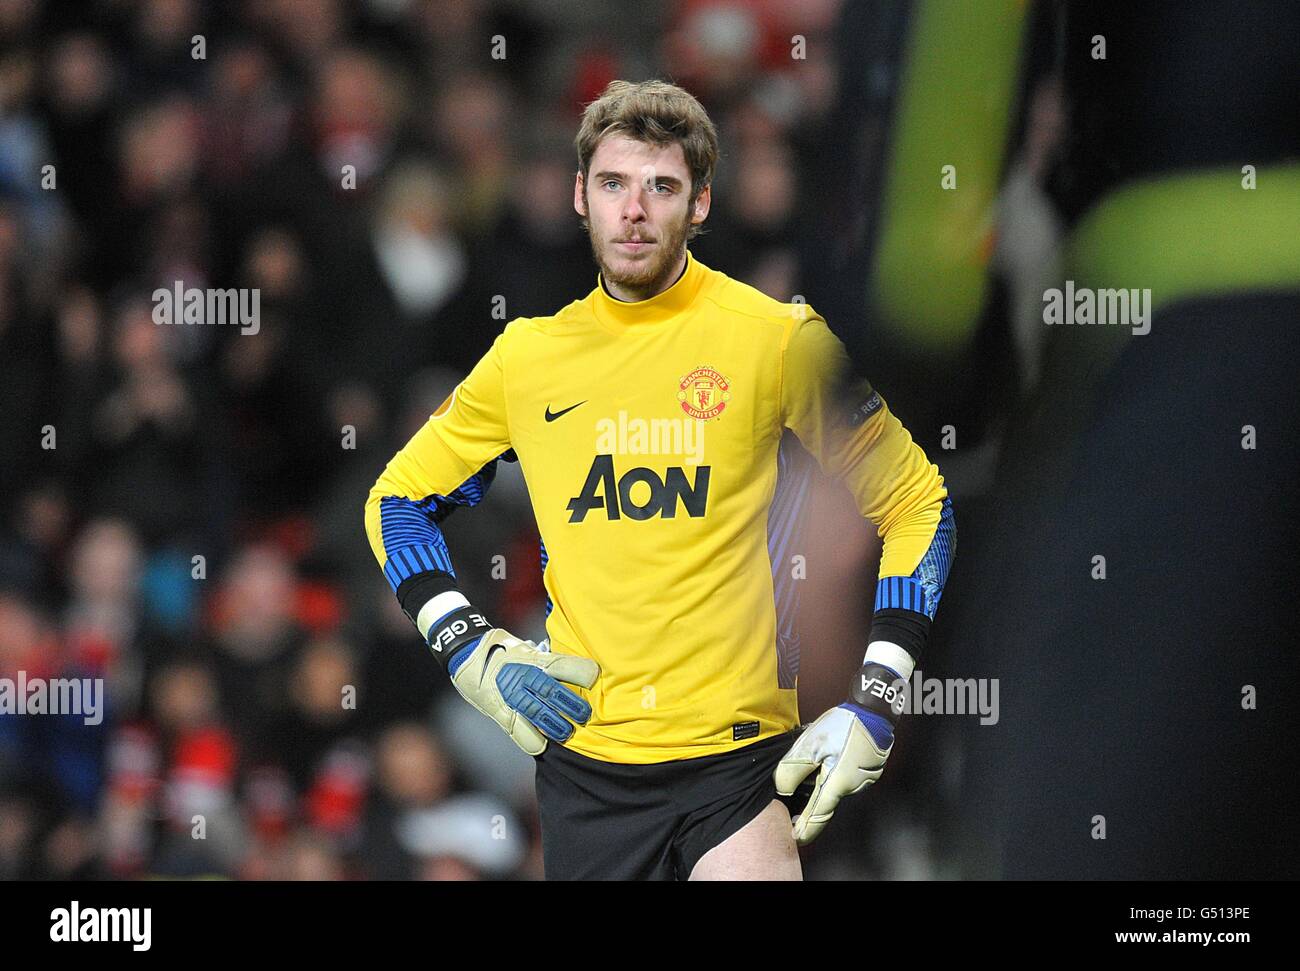 Manchester United goalkeeper David De Gea stands dejected after Athletic Bilbao's Oscar De Marcos scores his second goal of the match Stock Photo